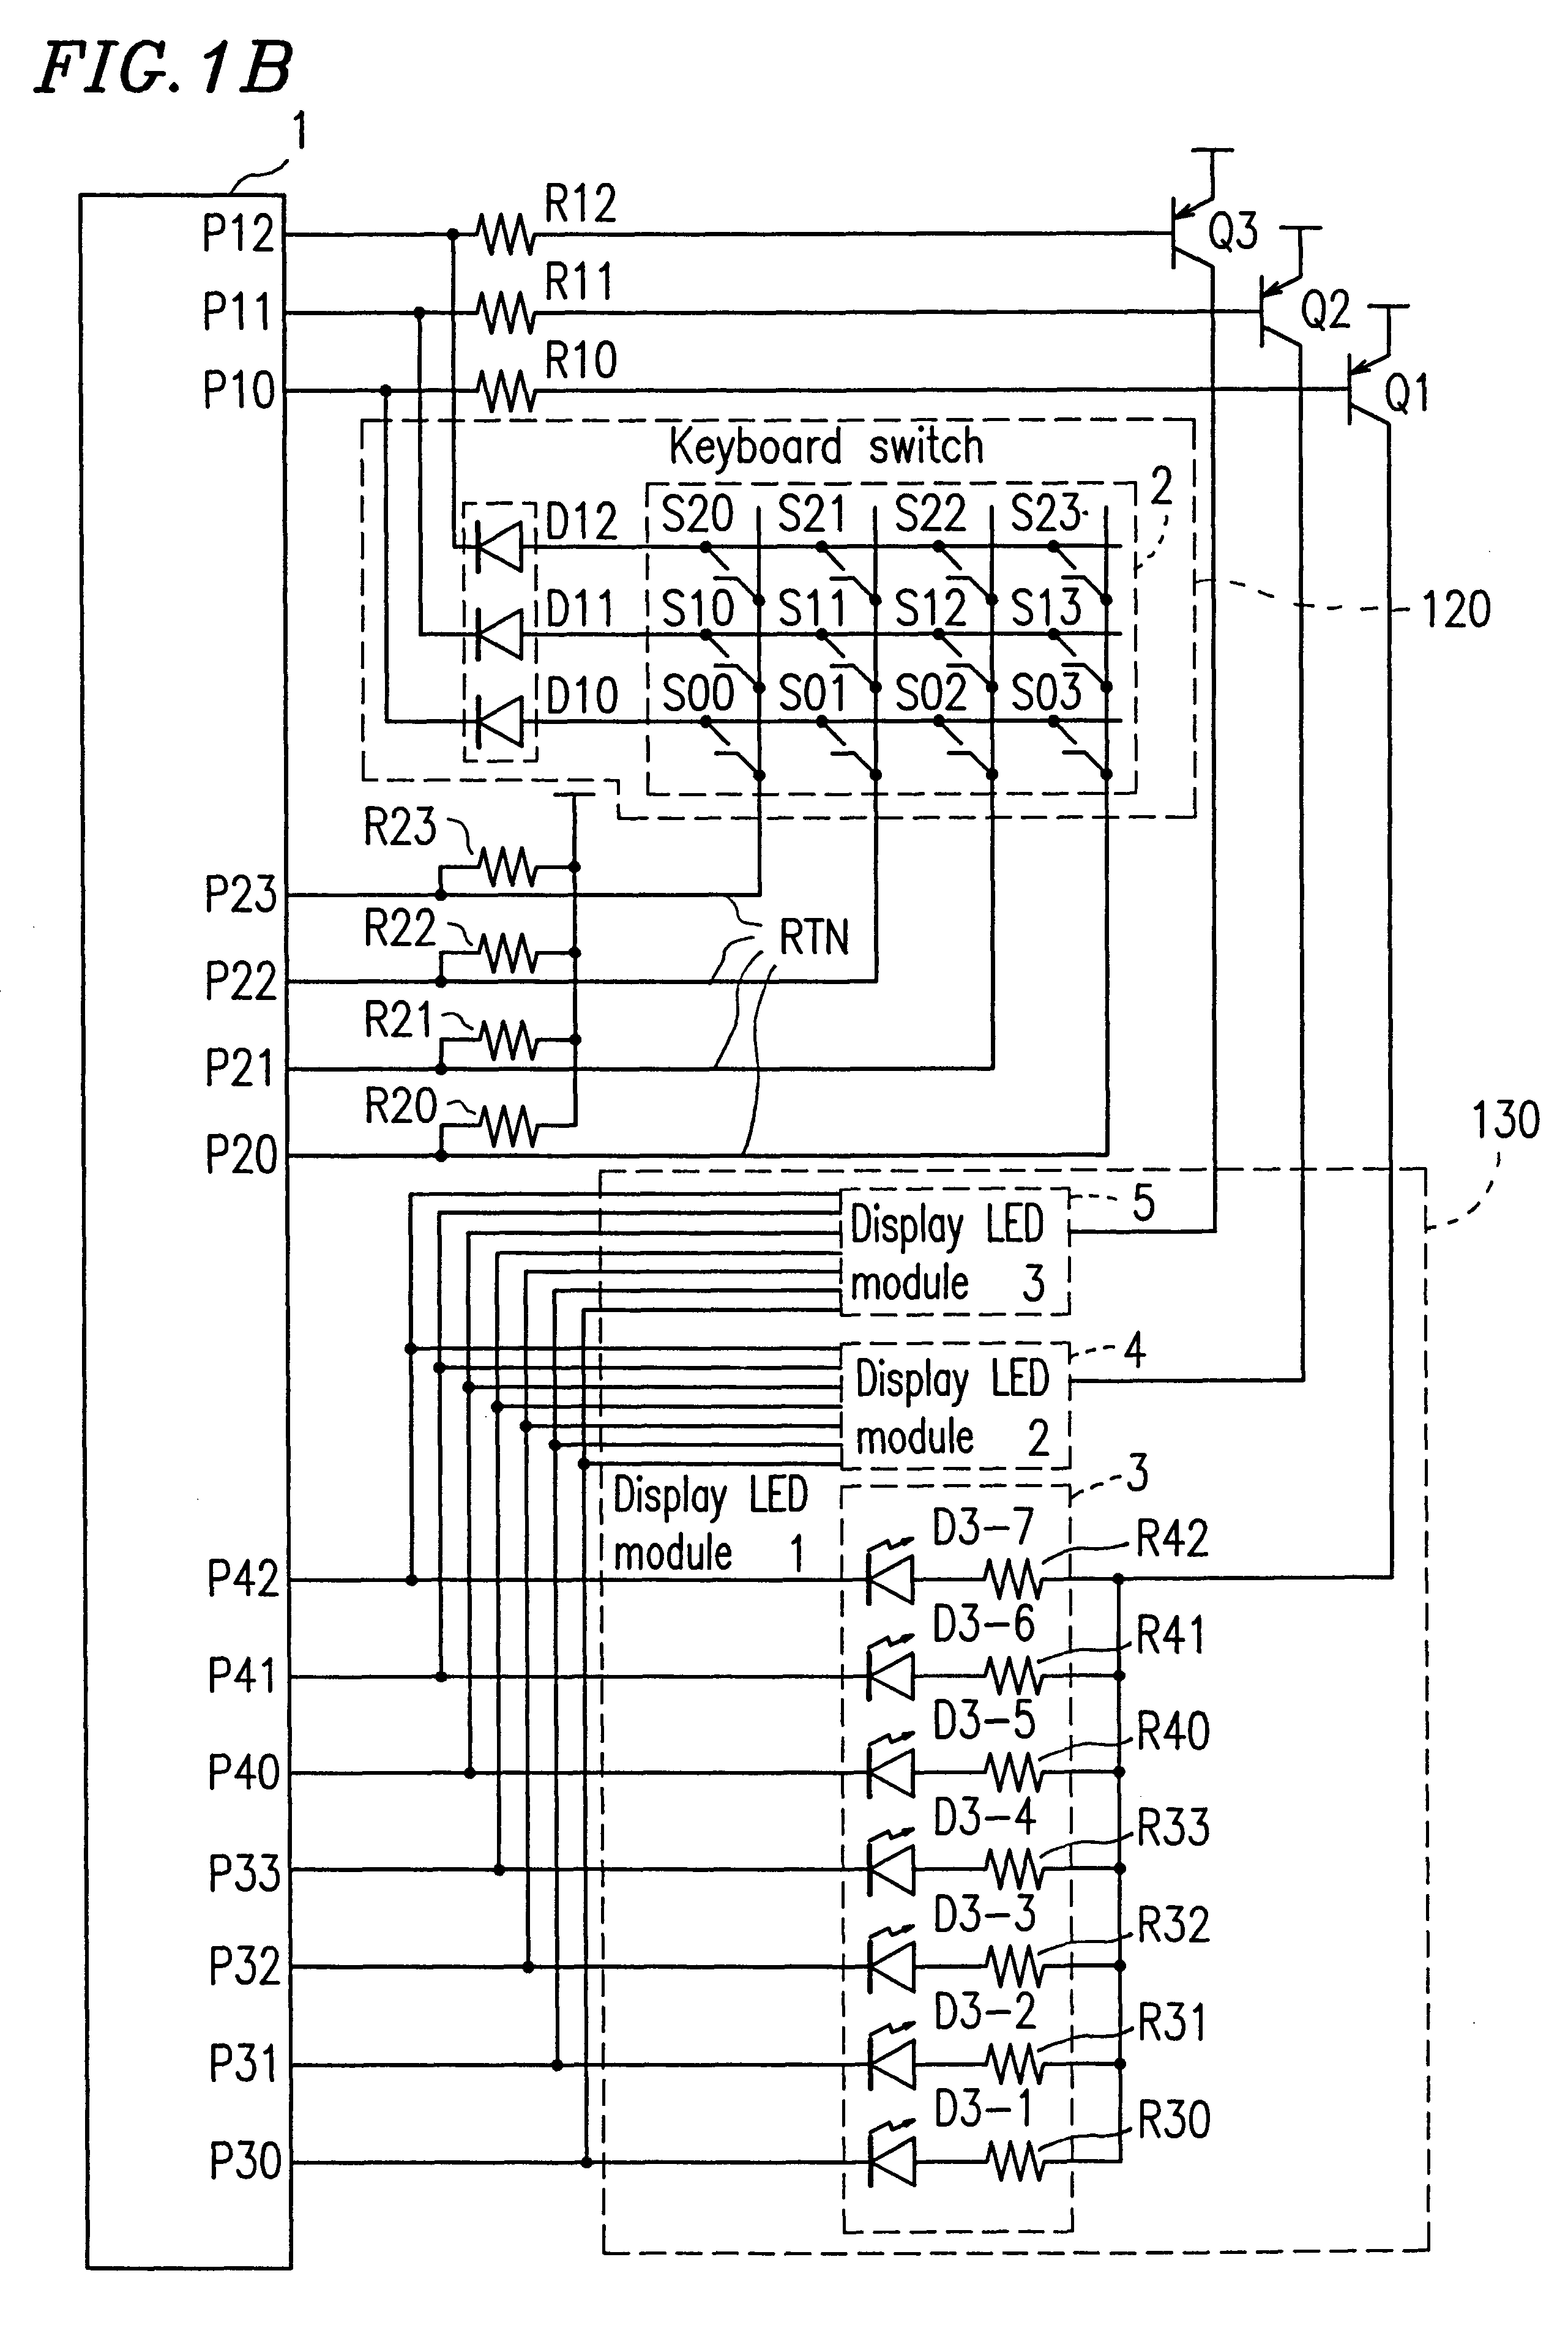 One-chip microcomputer system